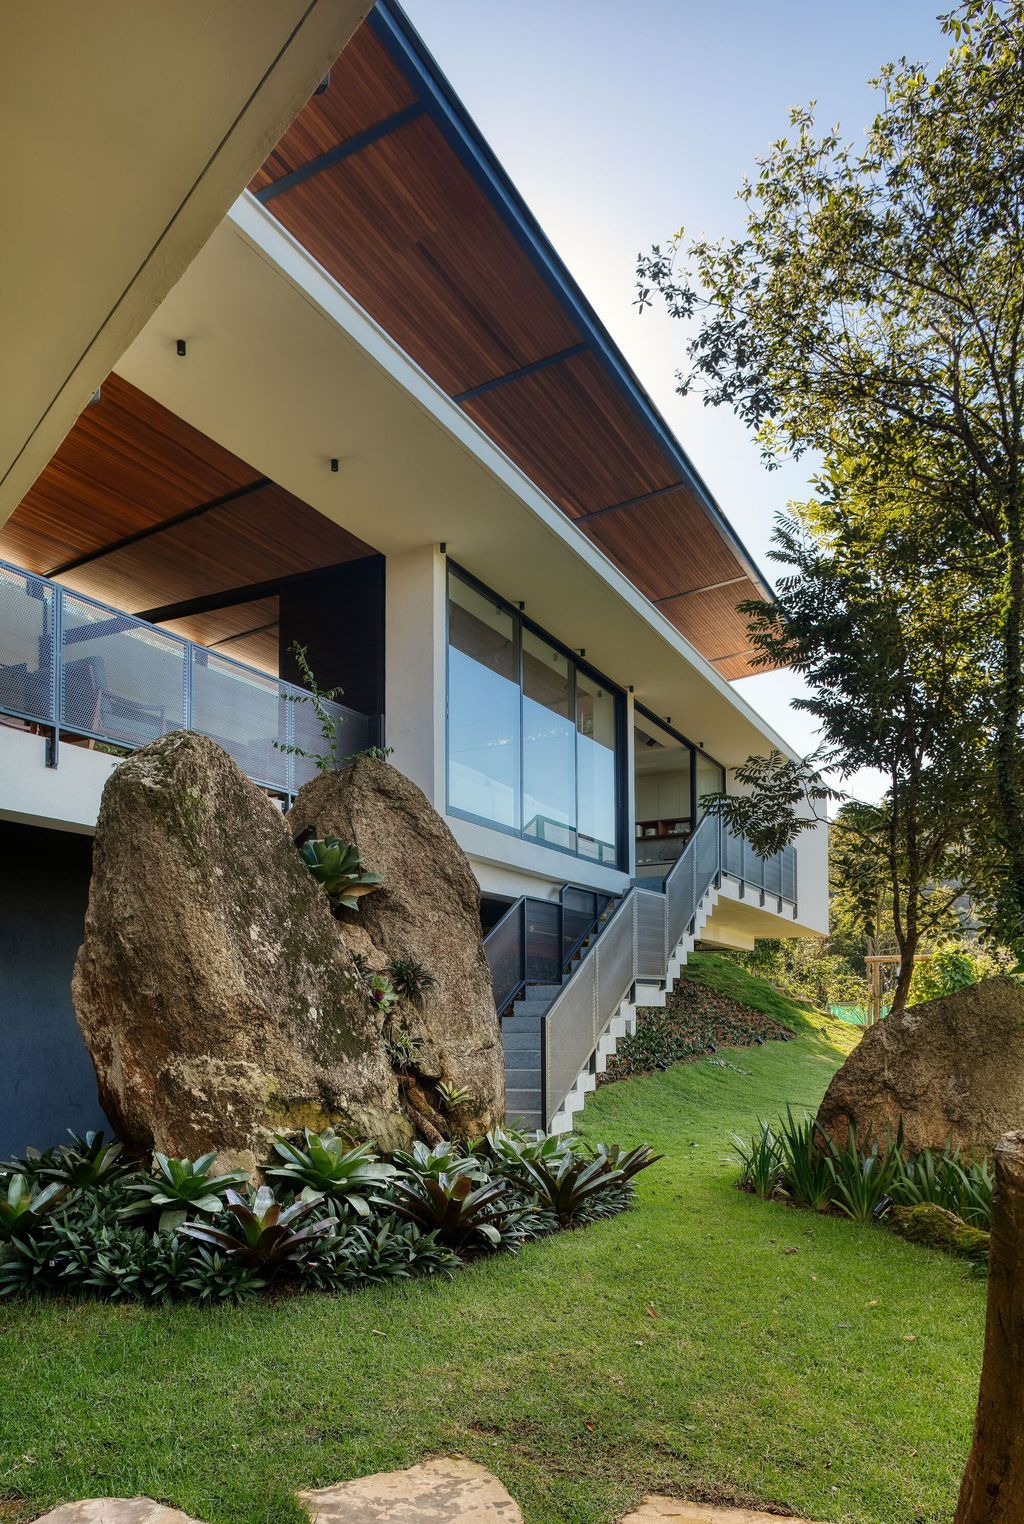 House-of-Stones-with-Stunning-Views-among-Nature-by-TETRO-Arquitetura-5